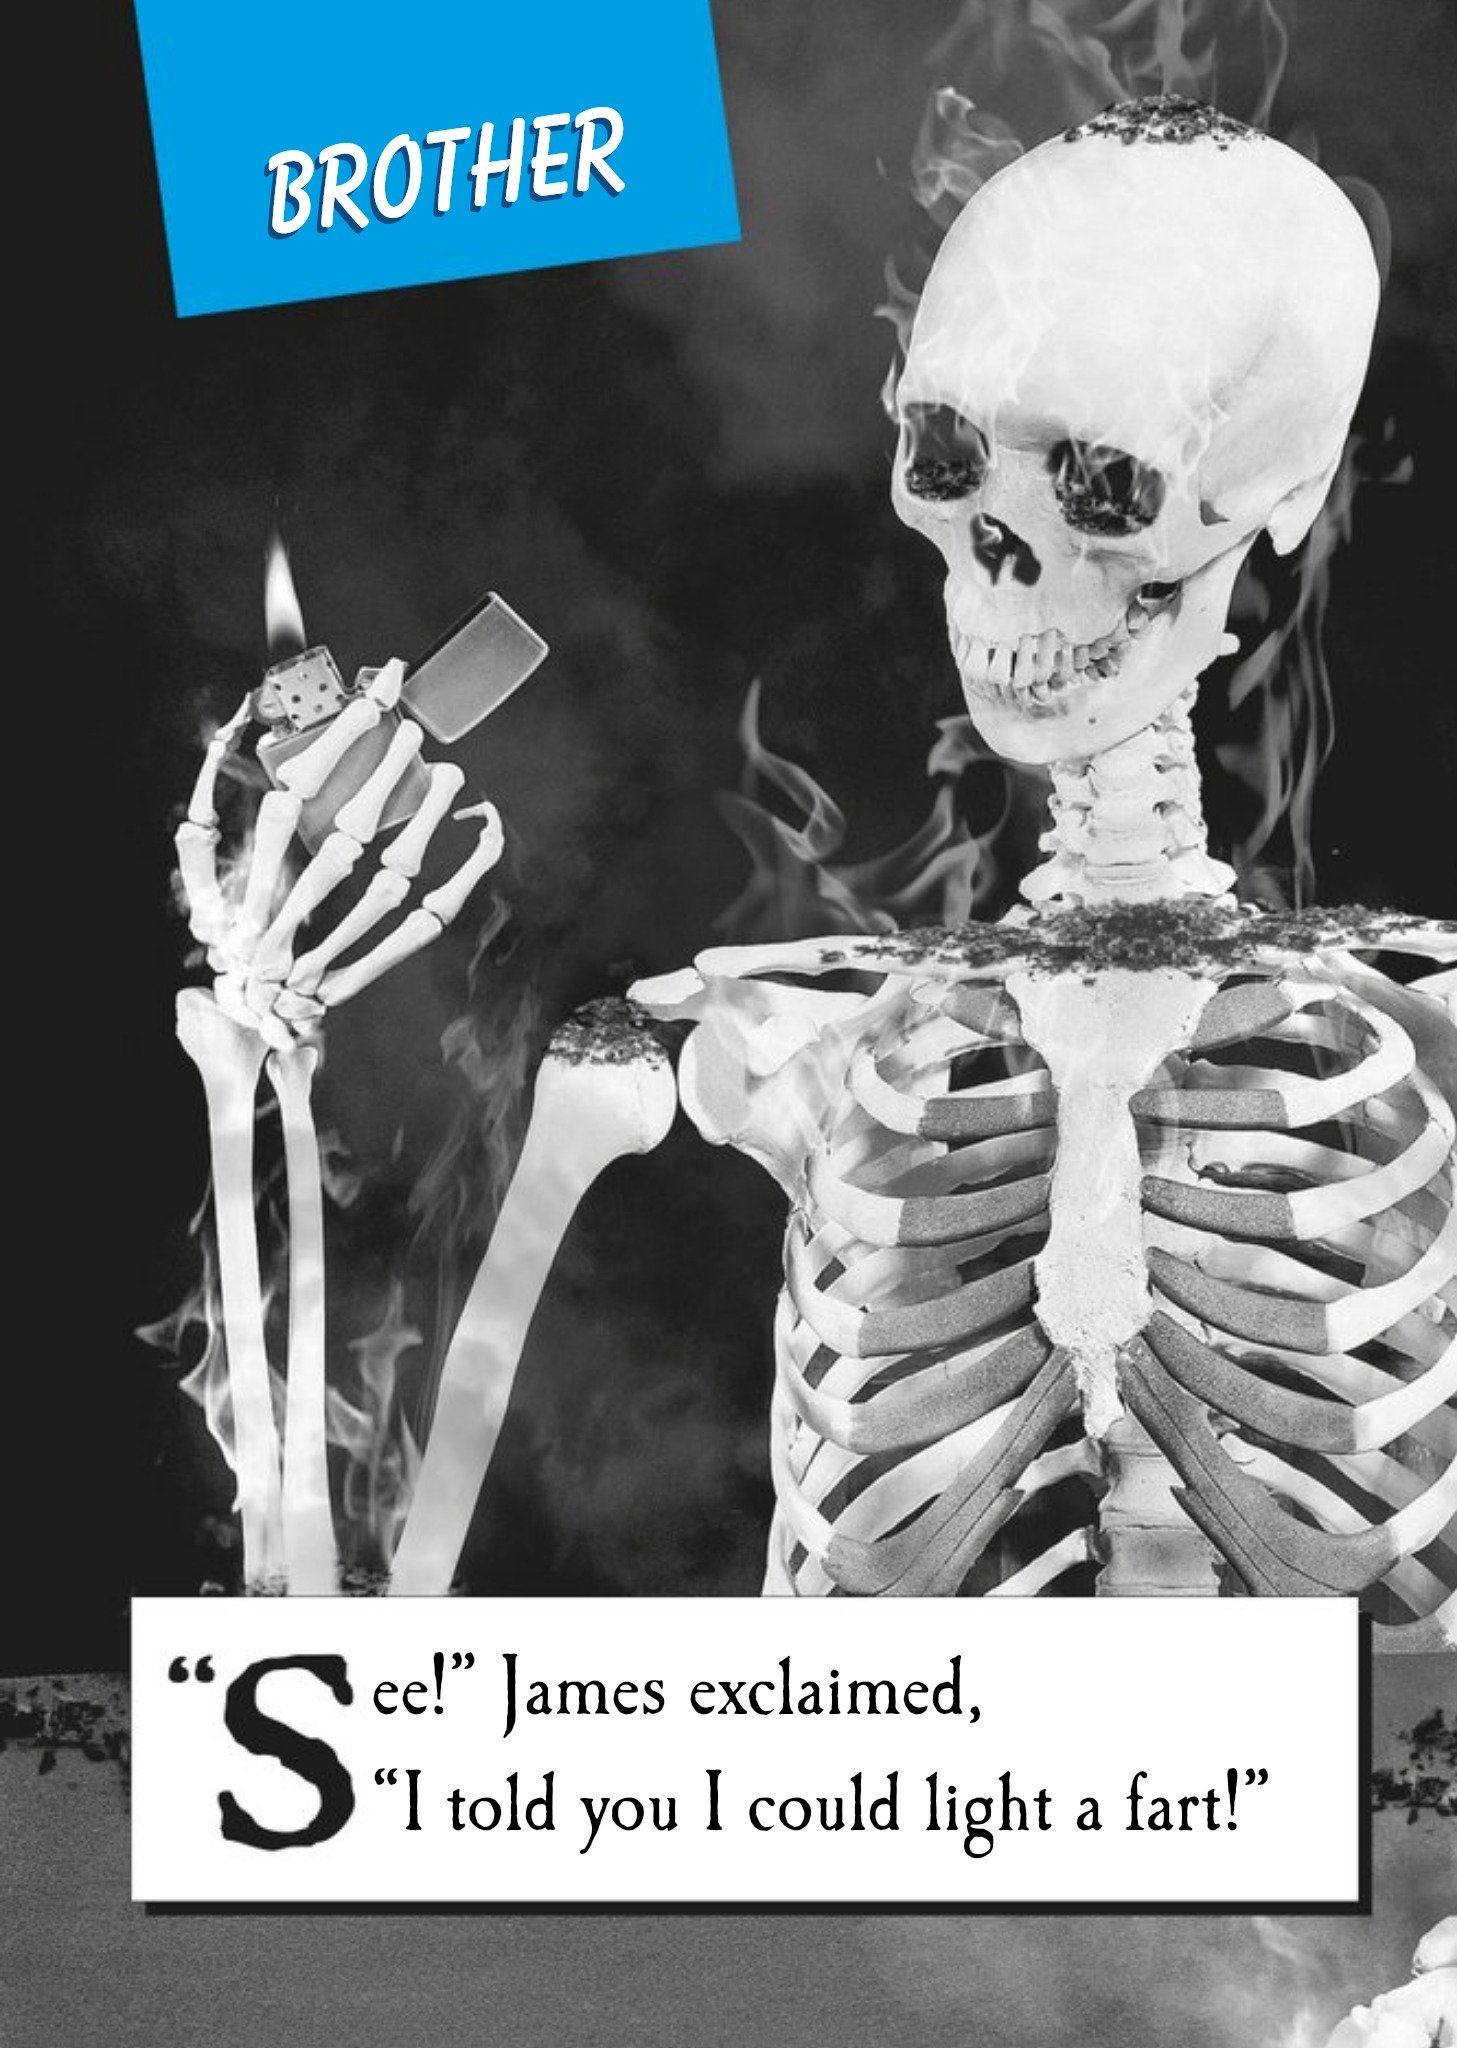 Moonpig Photograph Of A Skelton Holding Up A Lighter While On Smoke Humorous Brother's Birthday Card